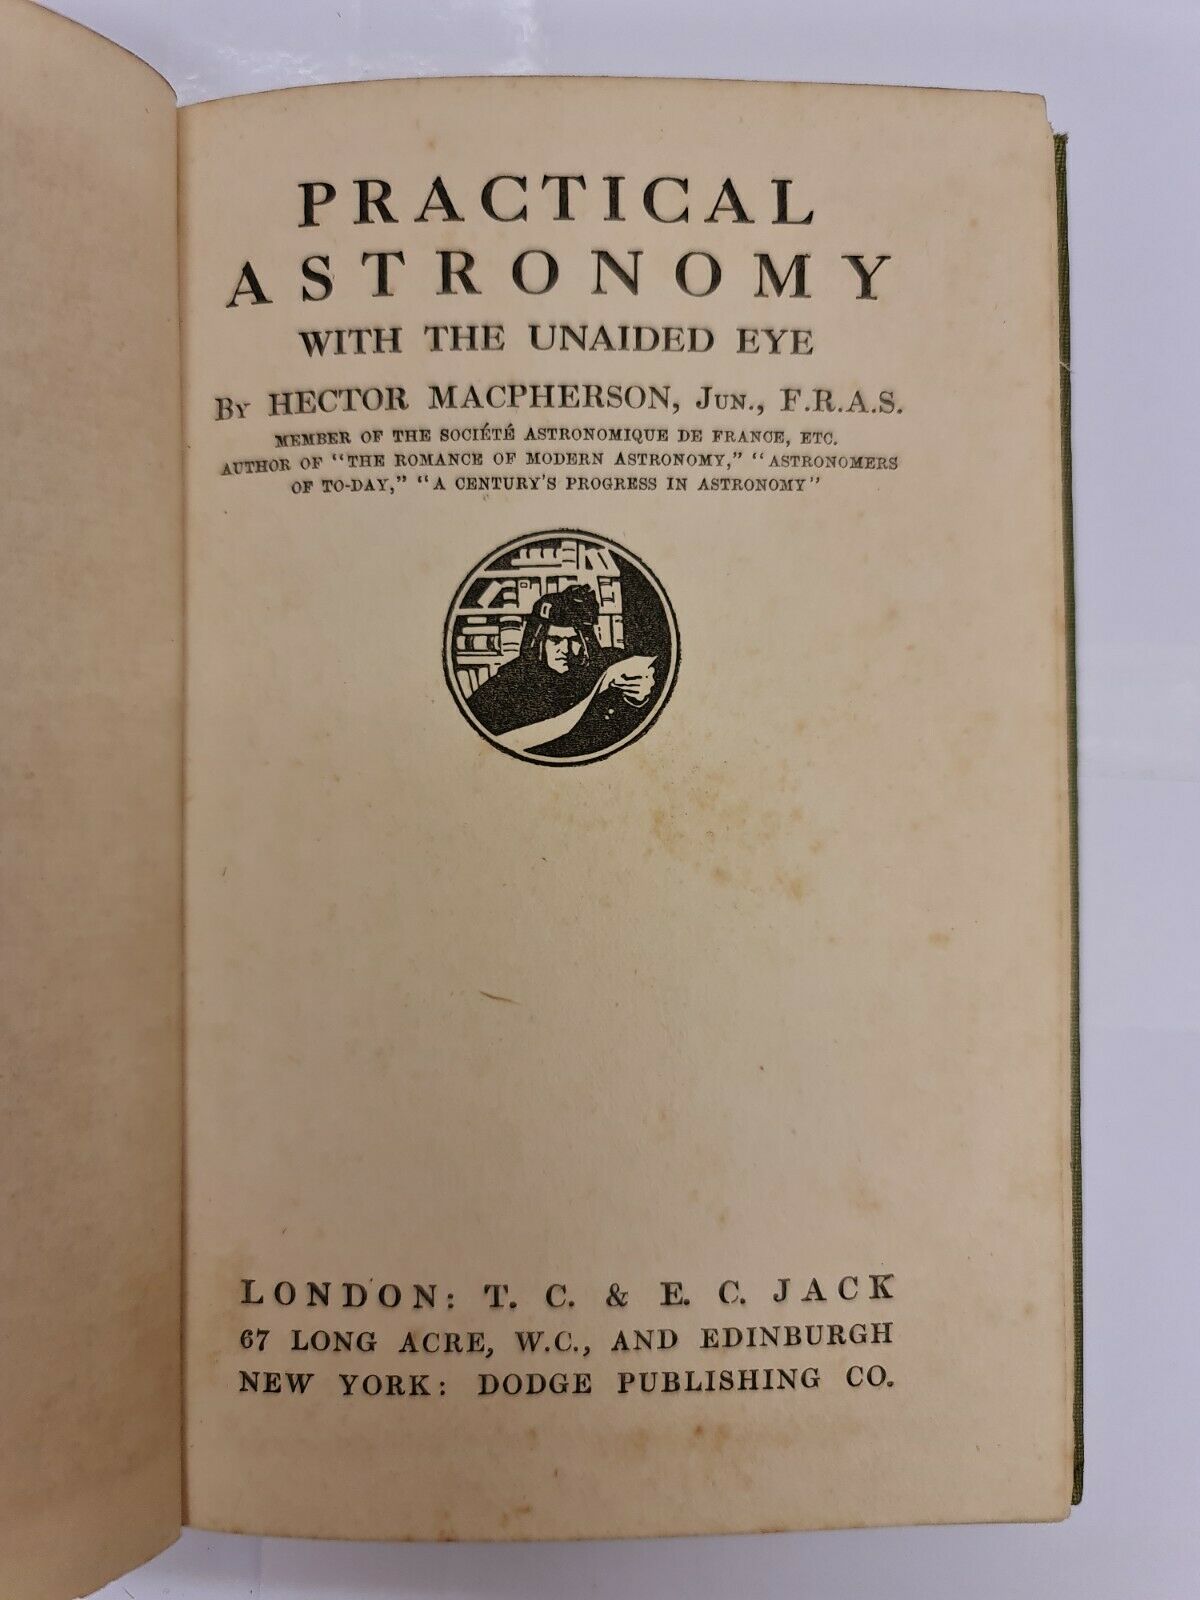 Practical Astronomy With The Unaided Eye by Hector MacPherson